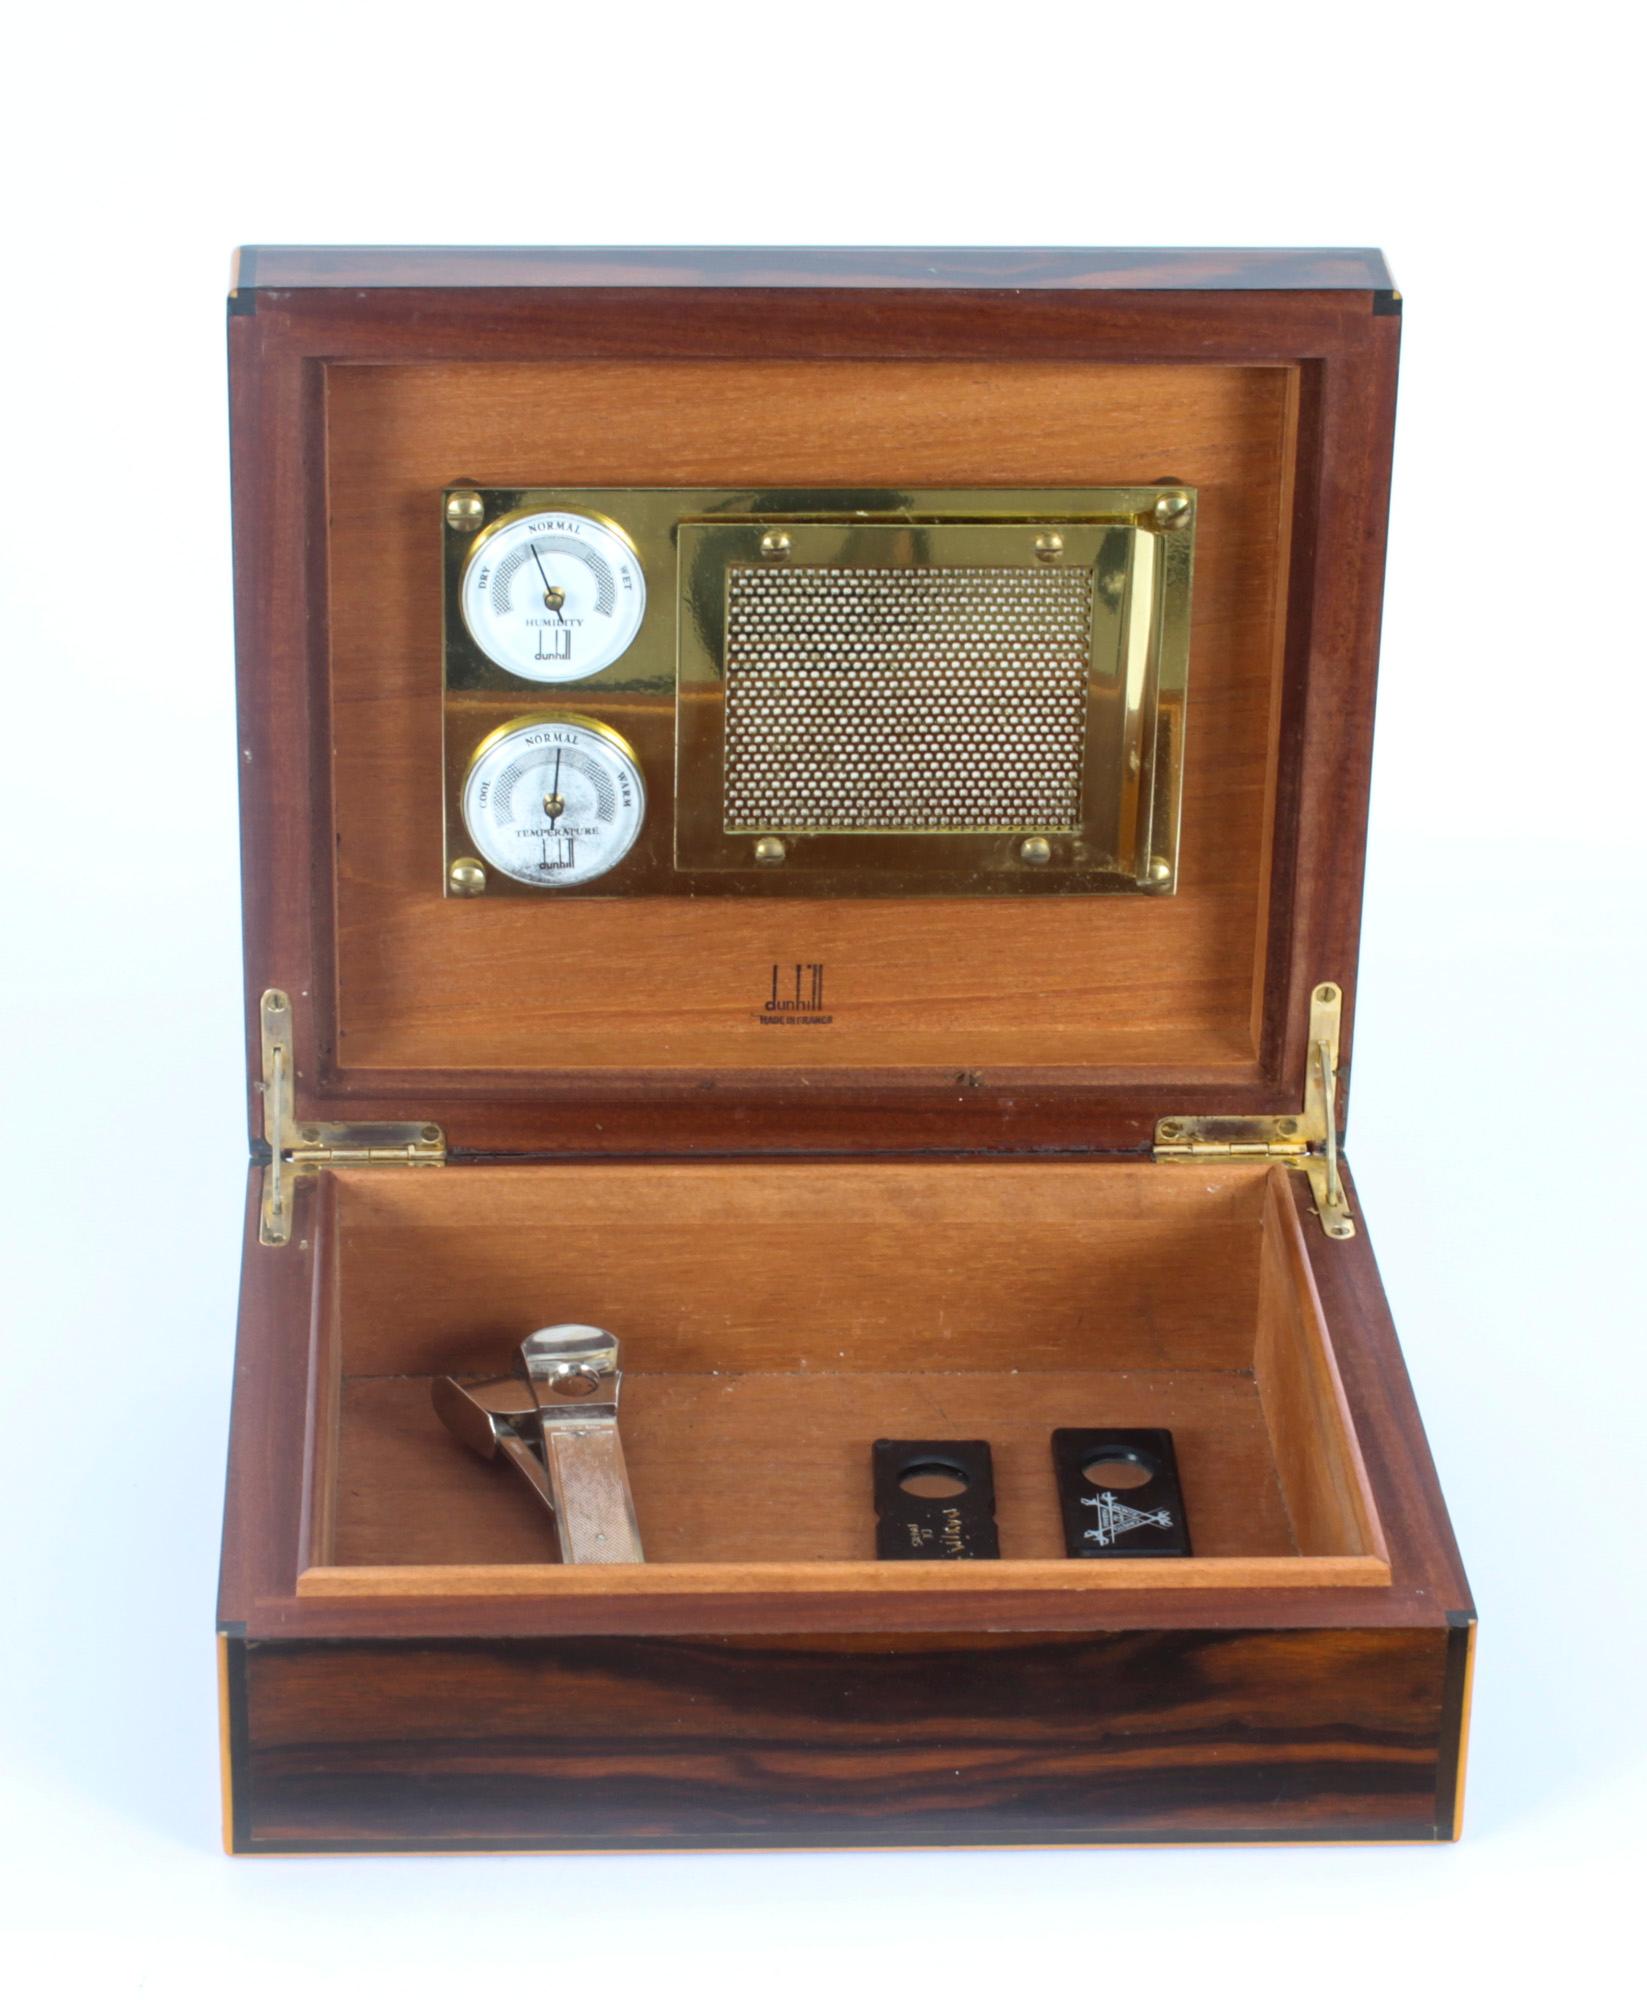 A Dunhill France, coromandel and boxwood strung cased cigar humidor, together with a sterling silver cigar cutter, dating from the second hald of the 20th Century.

The humidor has a Spanish cedar-lined interior which helps to keep the aroma and